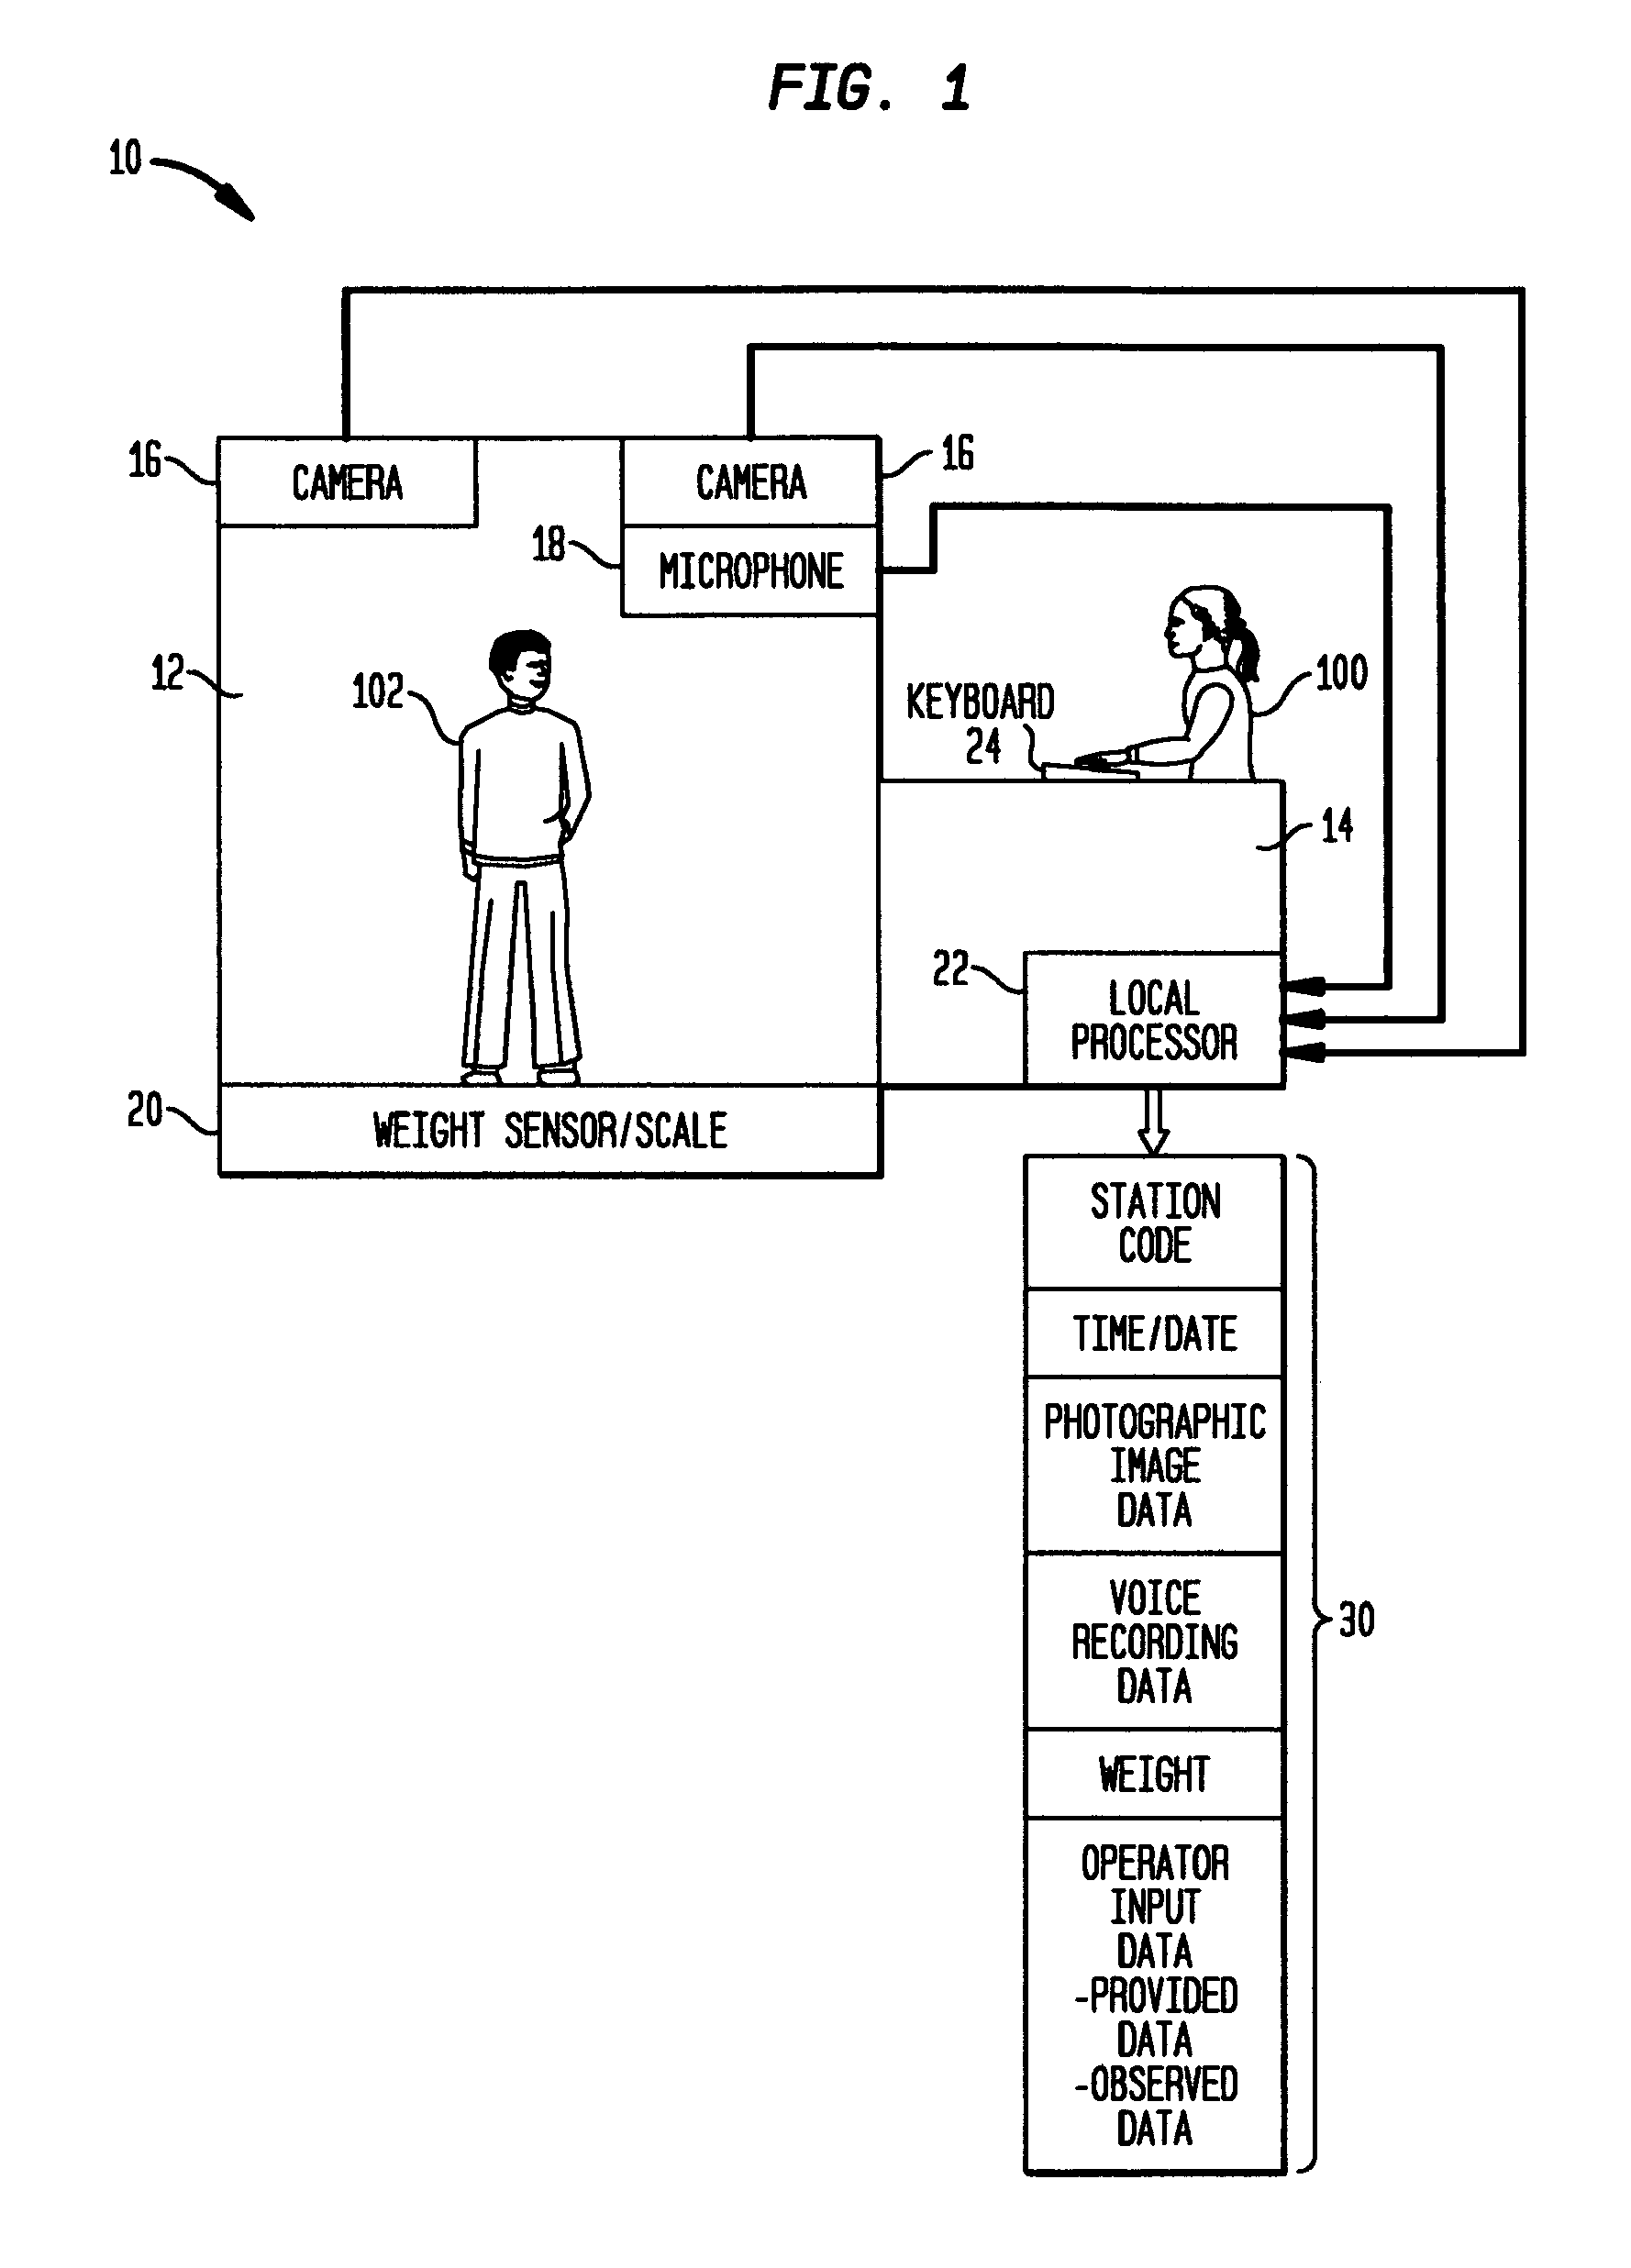 Biometric data collection and storage system